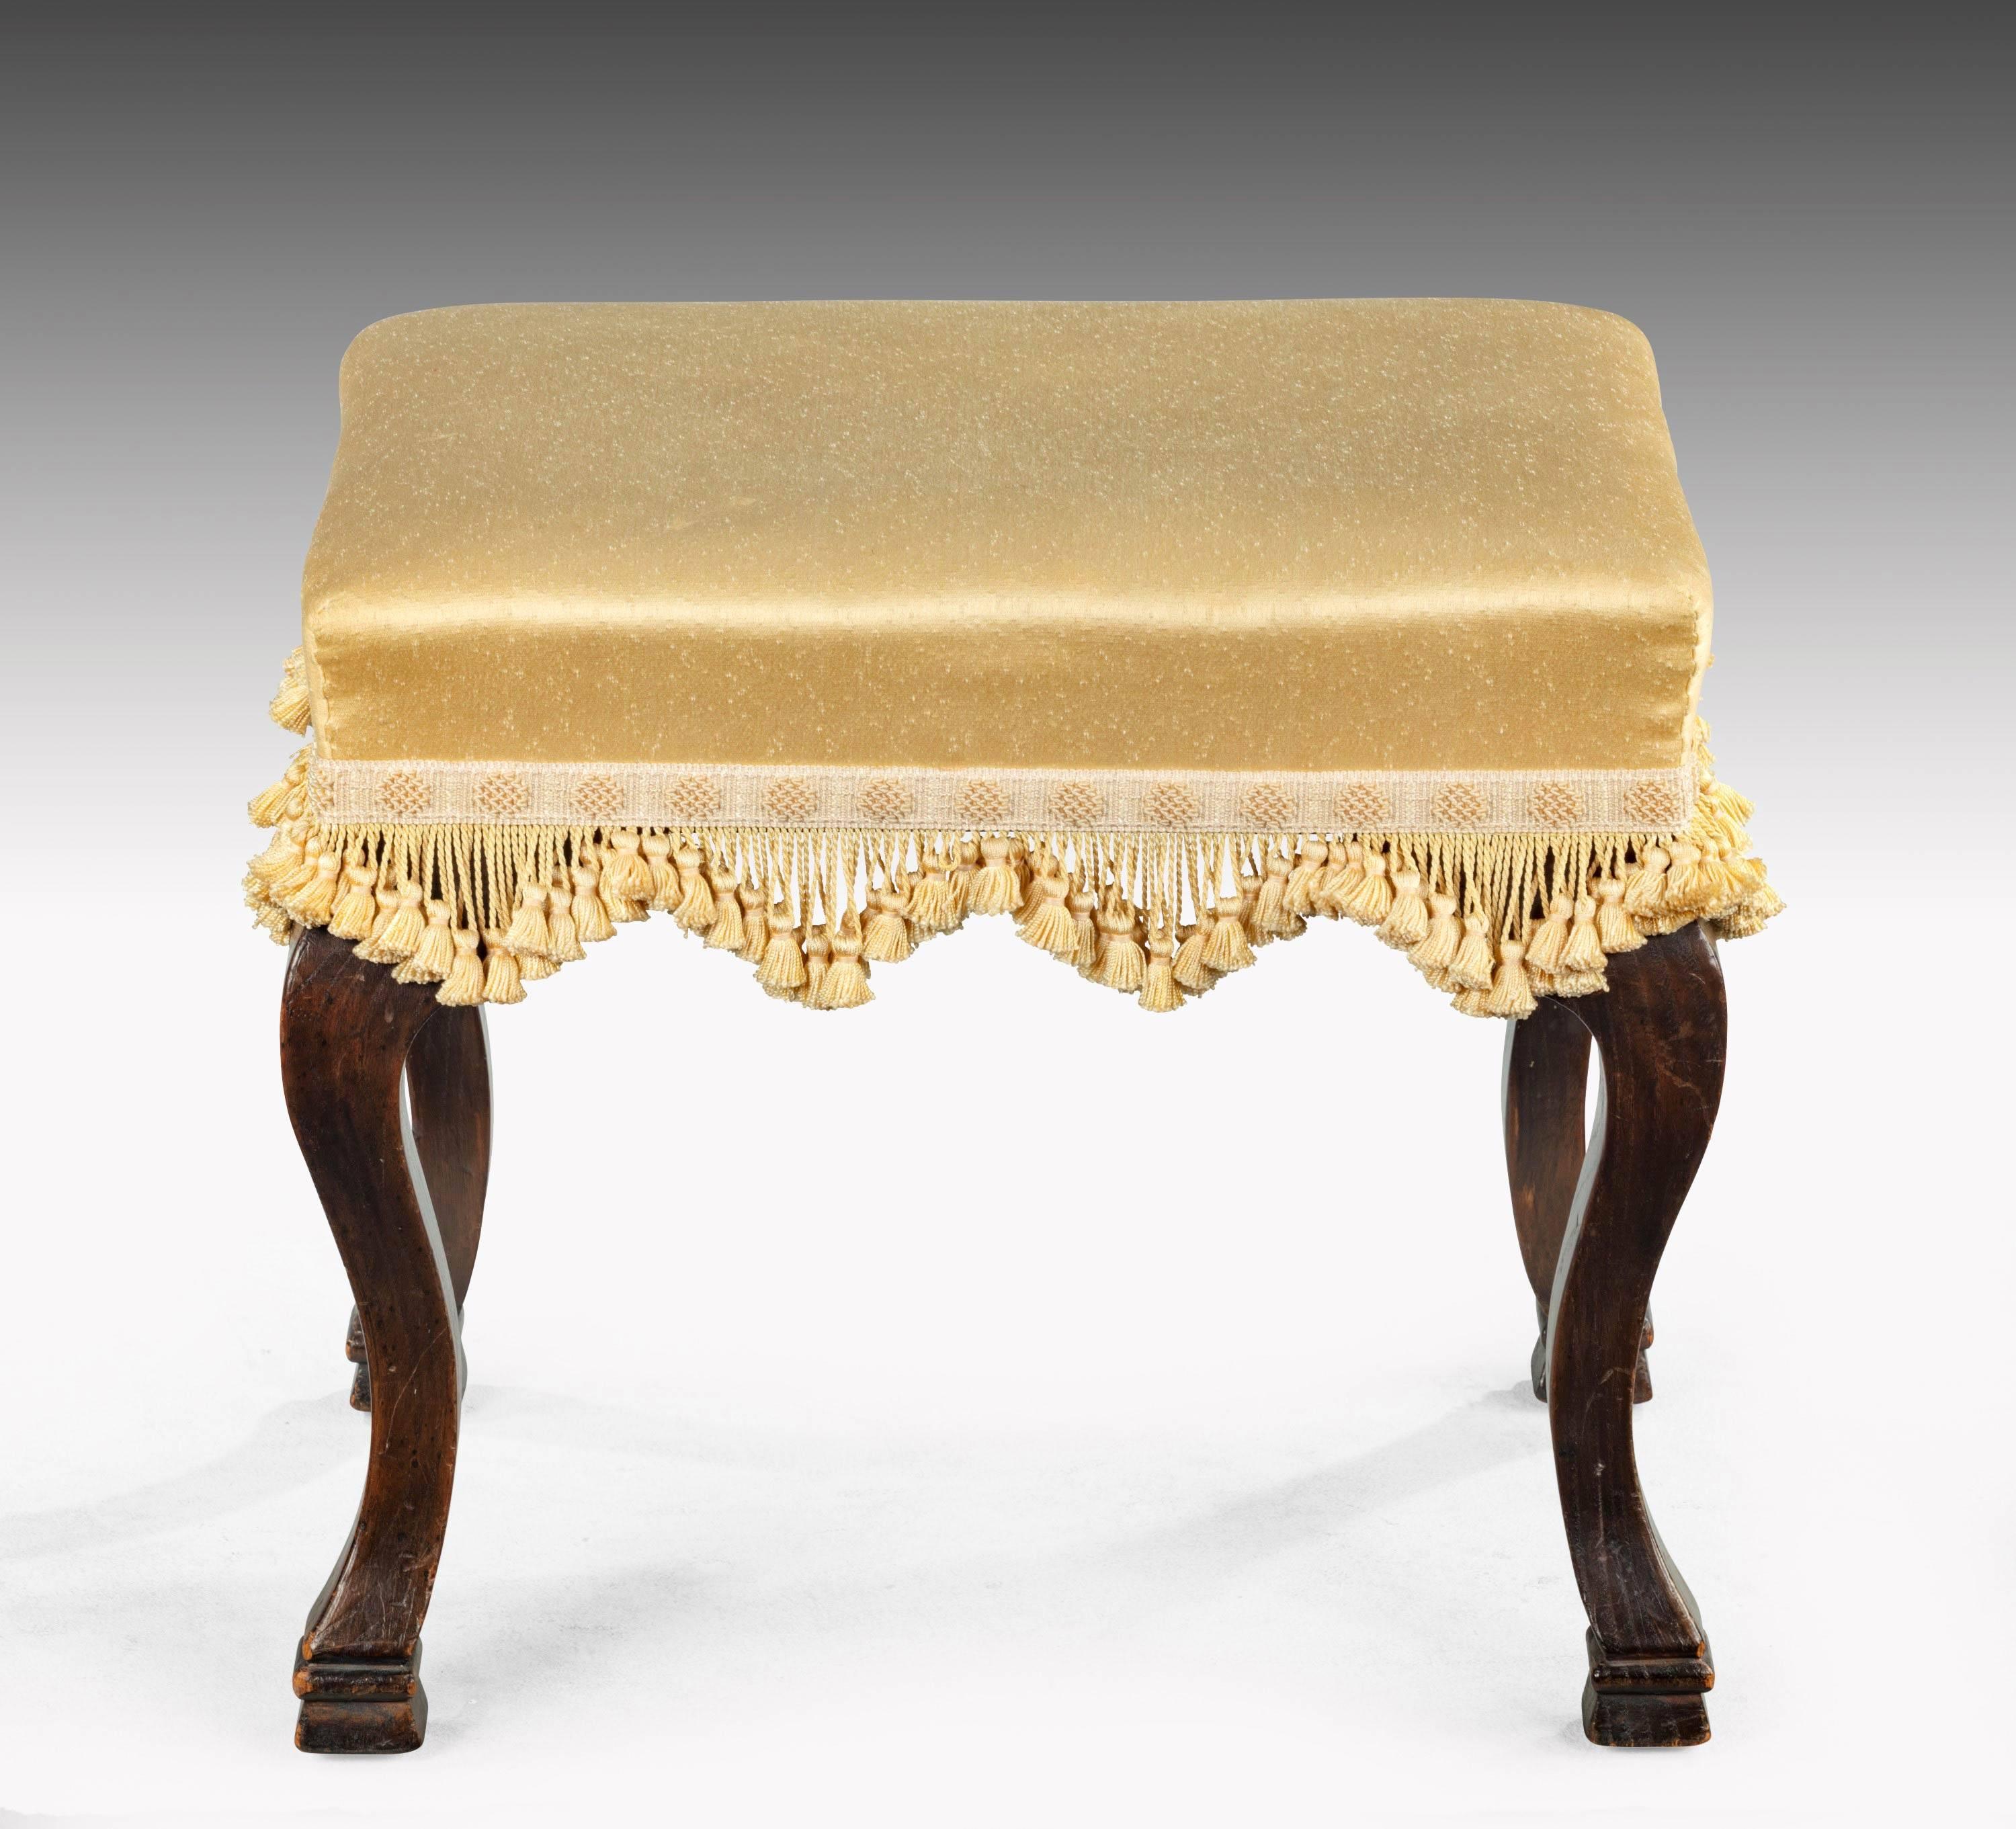 A late 19th century well-formed footstool on light cabriole legs.